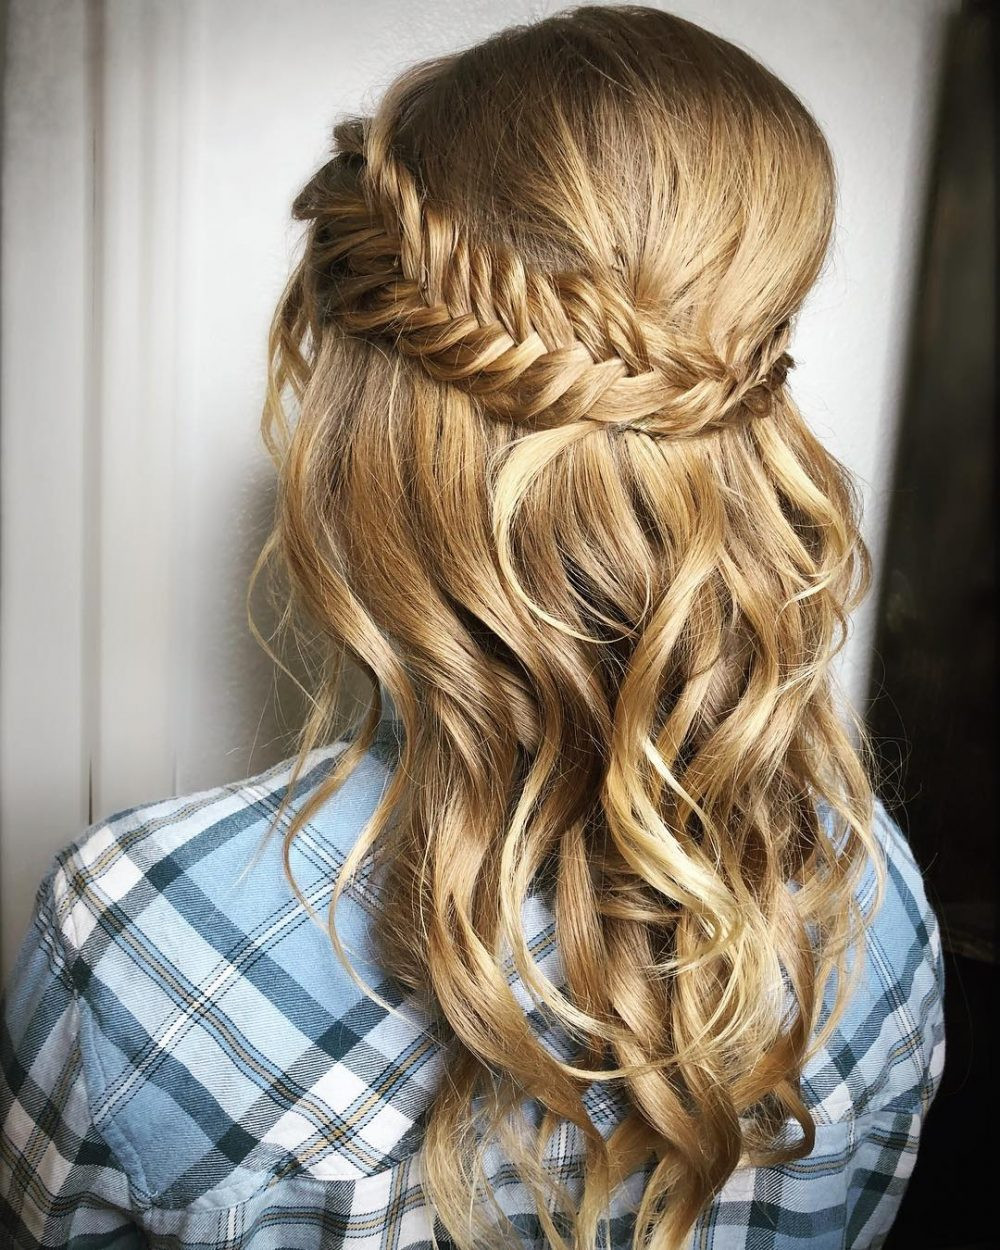 Prom Up Hairstyle
 27 Prettiest Half Up Half Down Prom Hairstyles for 2019